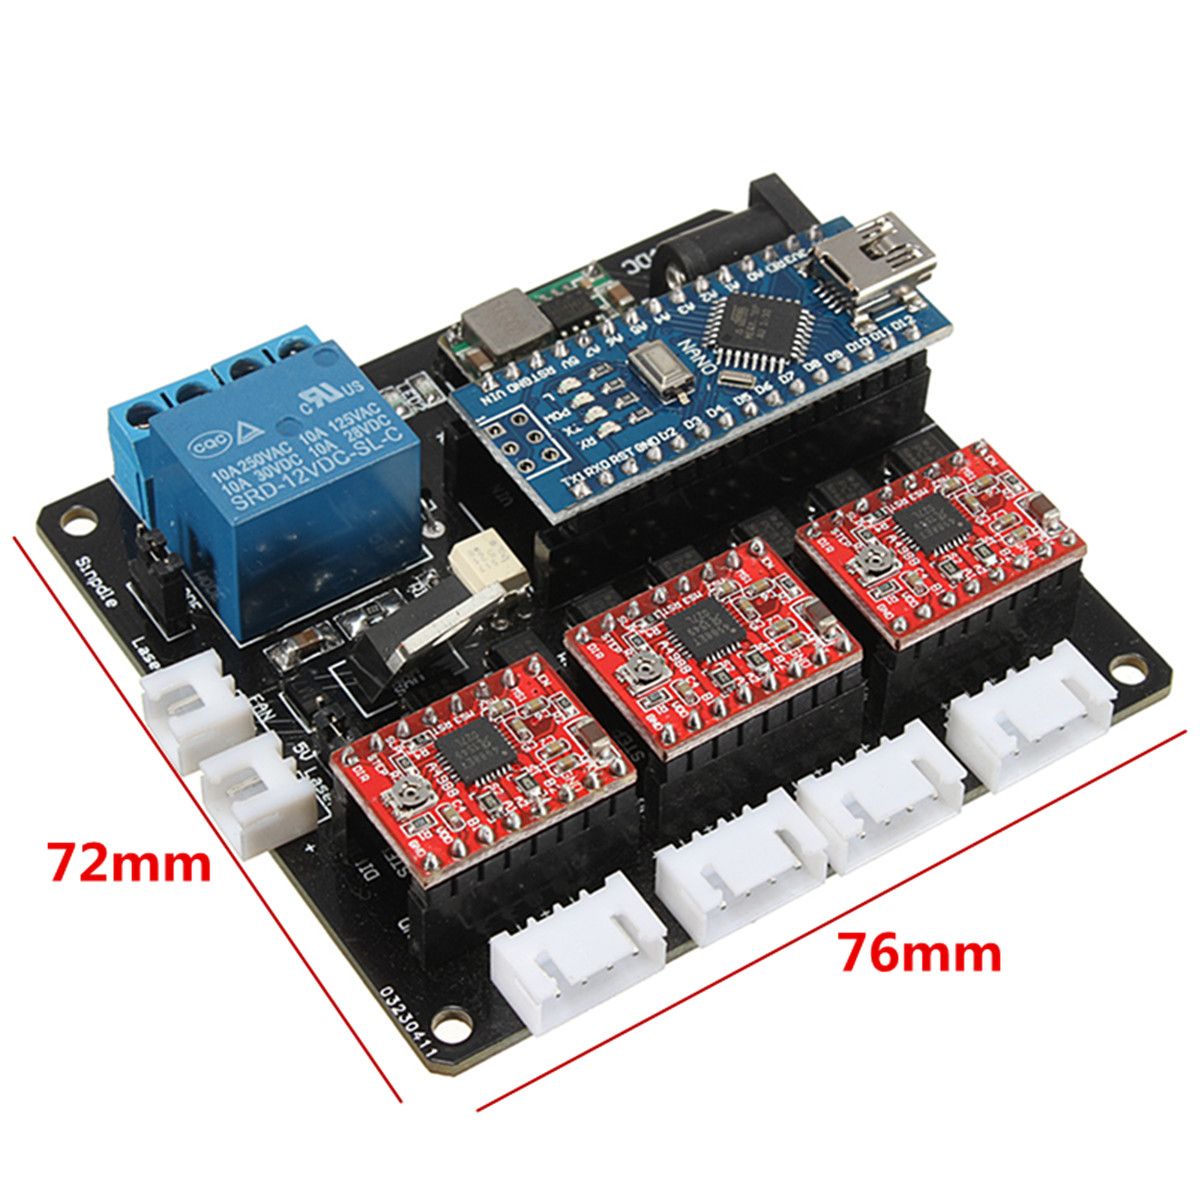 USB-3-Axis-Stepper-Motor-Driver-Board-For-DIY-Laser-Engraving-Machine-3-Axis-Control-Board-1295462